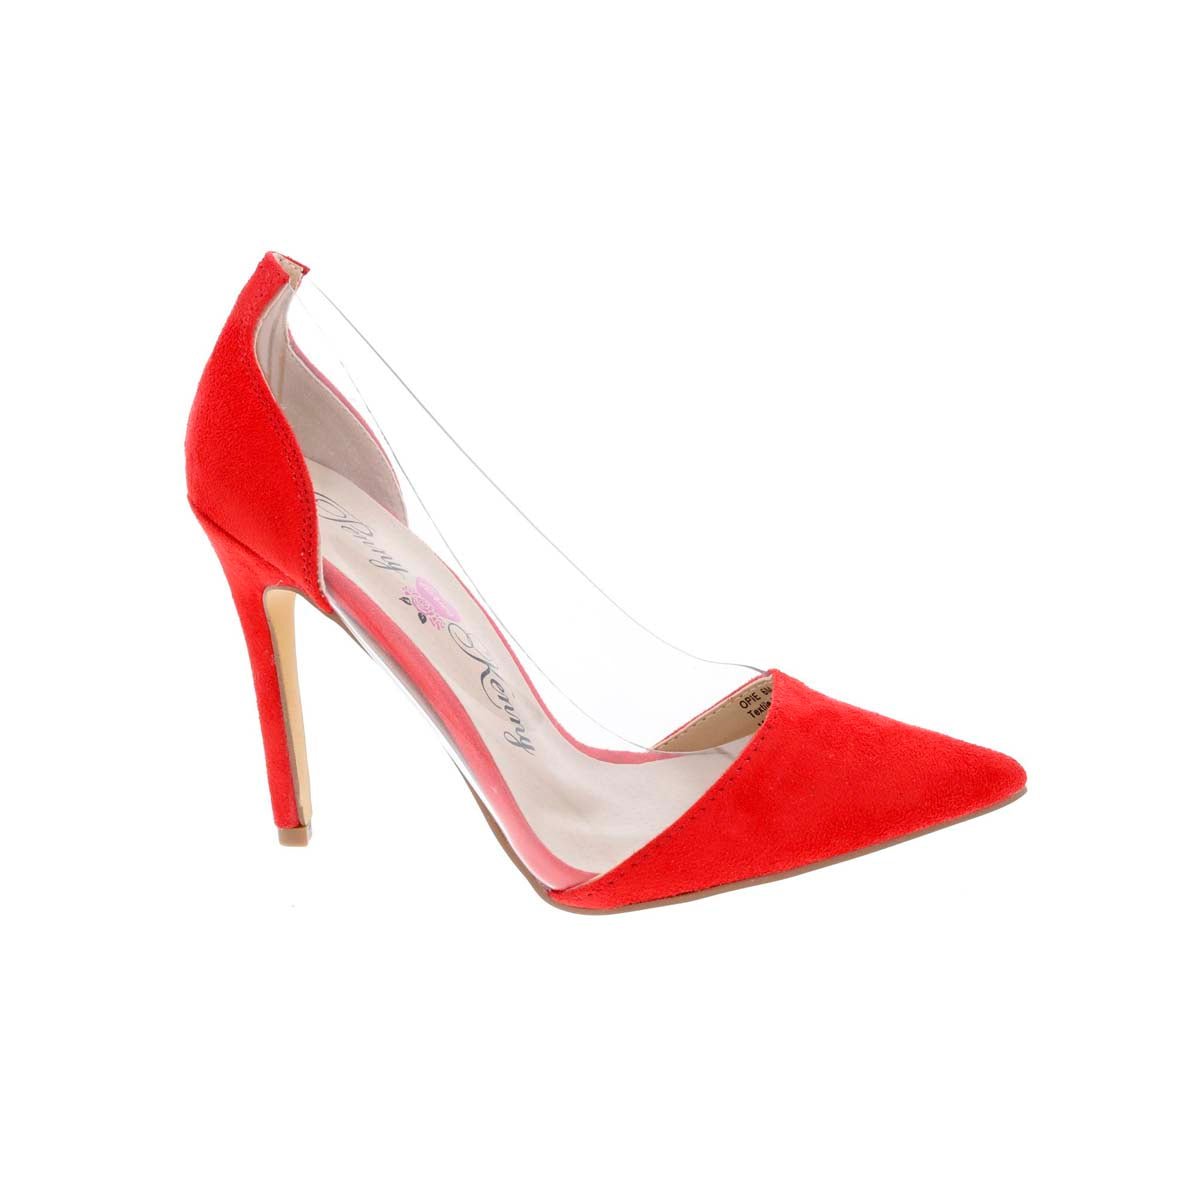 PENNY LOVES KENNY OPIE WOMEN PUMPS SHOE IN RED MICRO/LUCITE - TLW Shoes